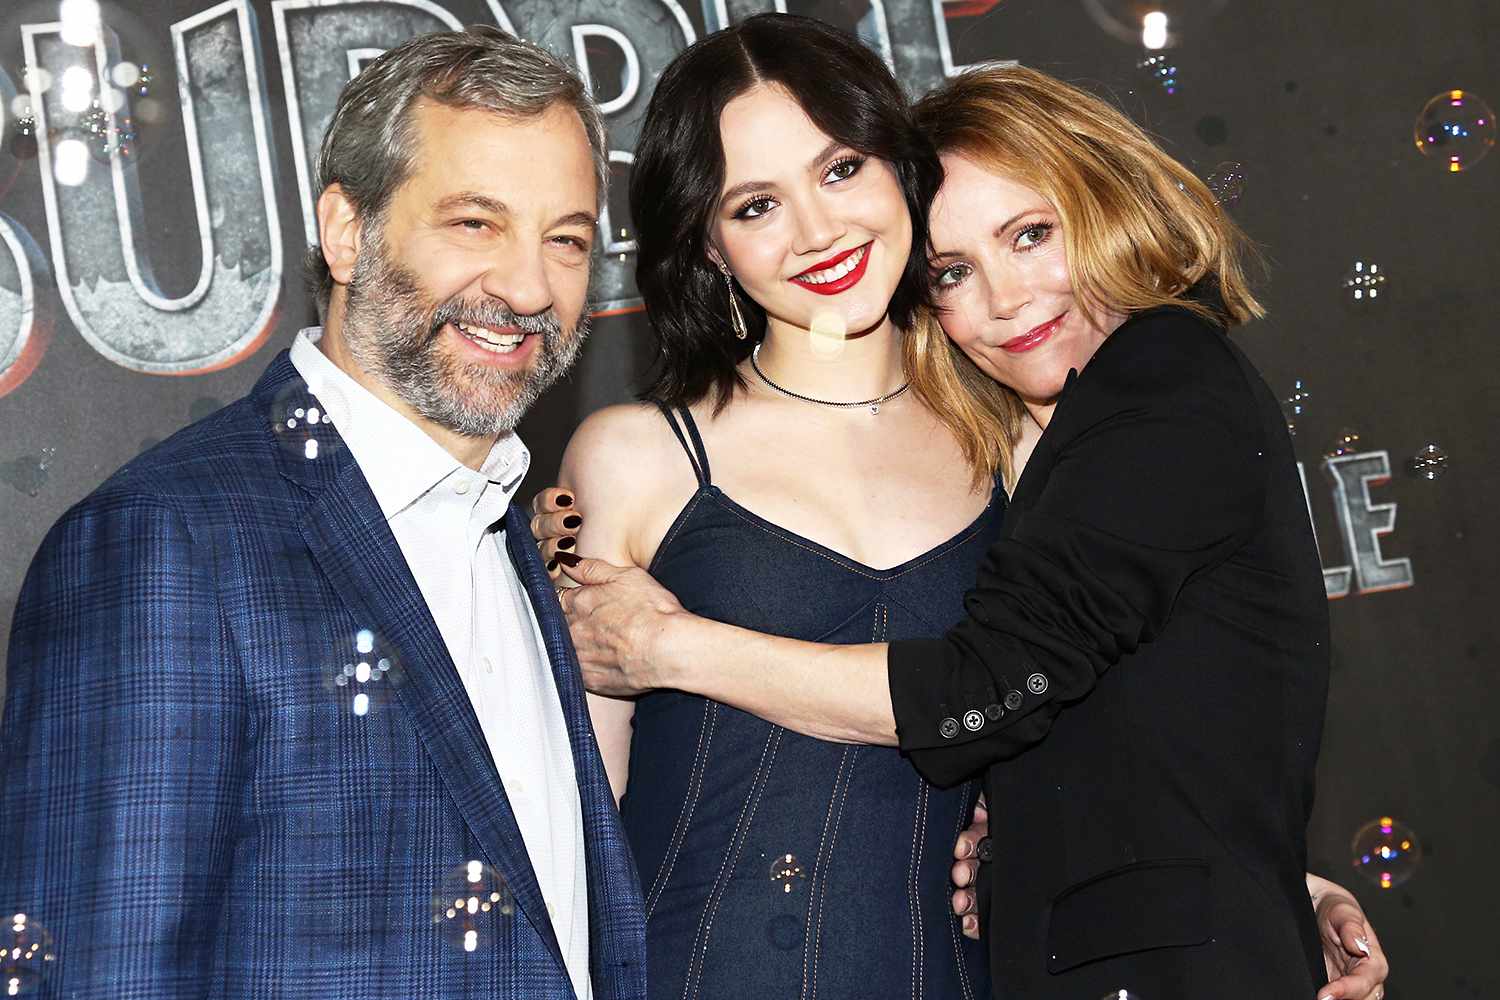 Judd Apatow, Iris Apatow and Leslie Mann attend a photocall for "The Bubble," hosted by Netflix, at Four Seasons Hotel Los Angeles at Beverly Hills on March 05, 2022 in Los Angeles, California.